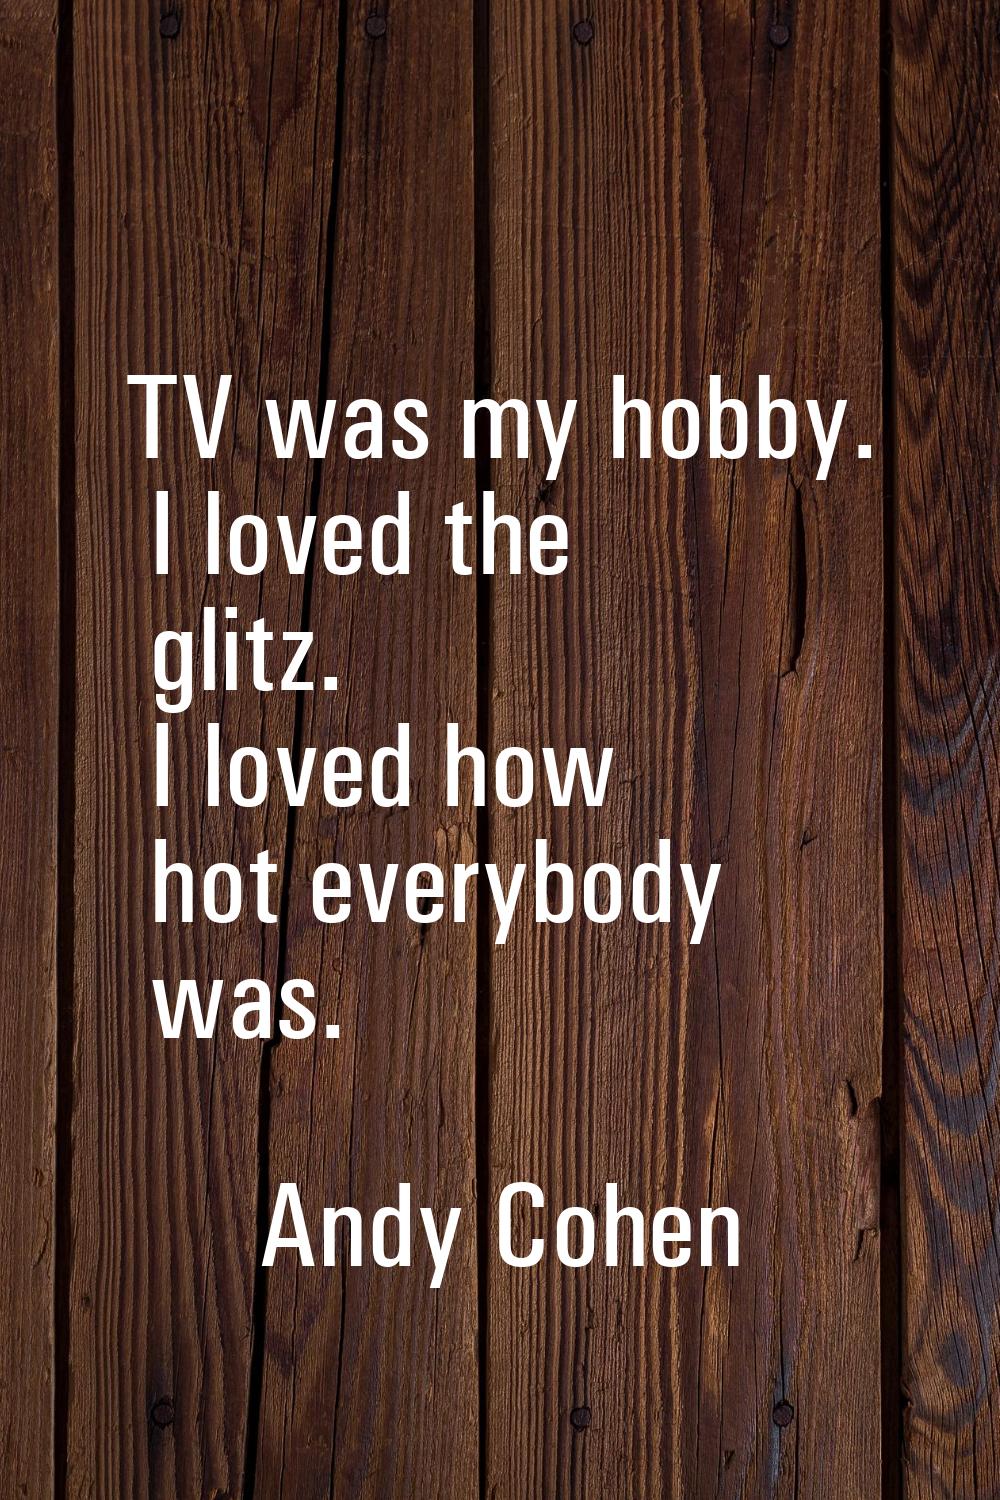 TV was my hobby. I loved the glitz. I loved how hot everybody was.